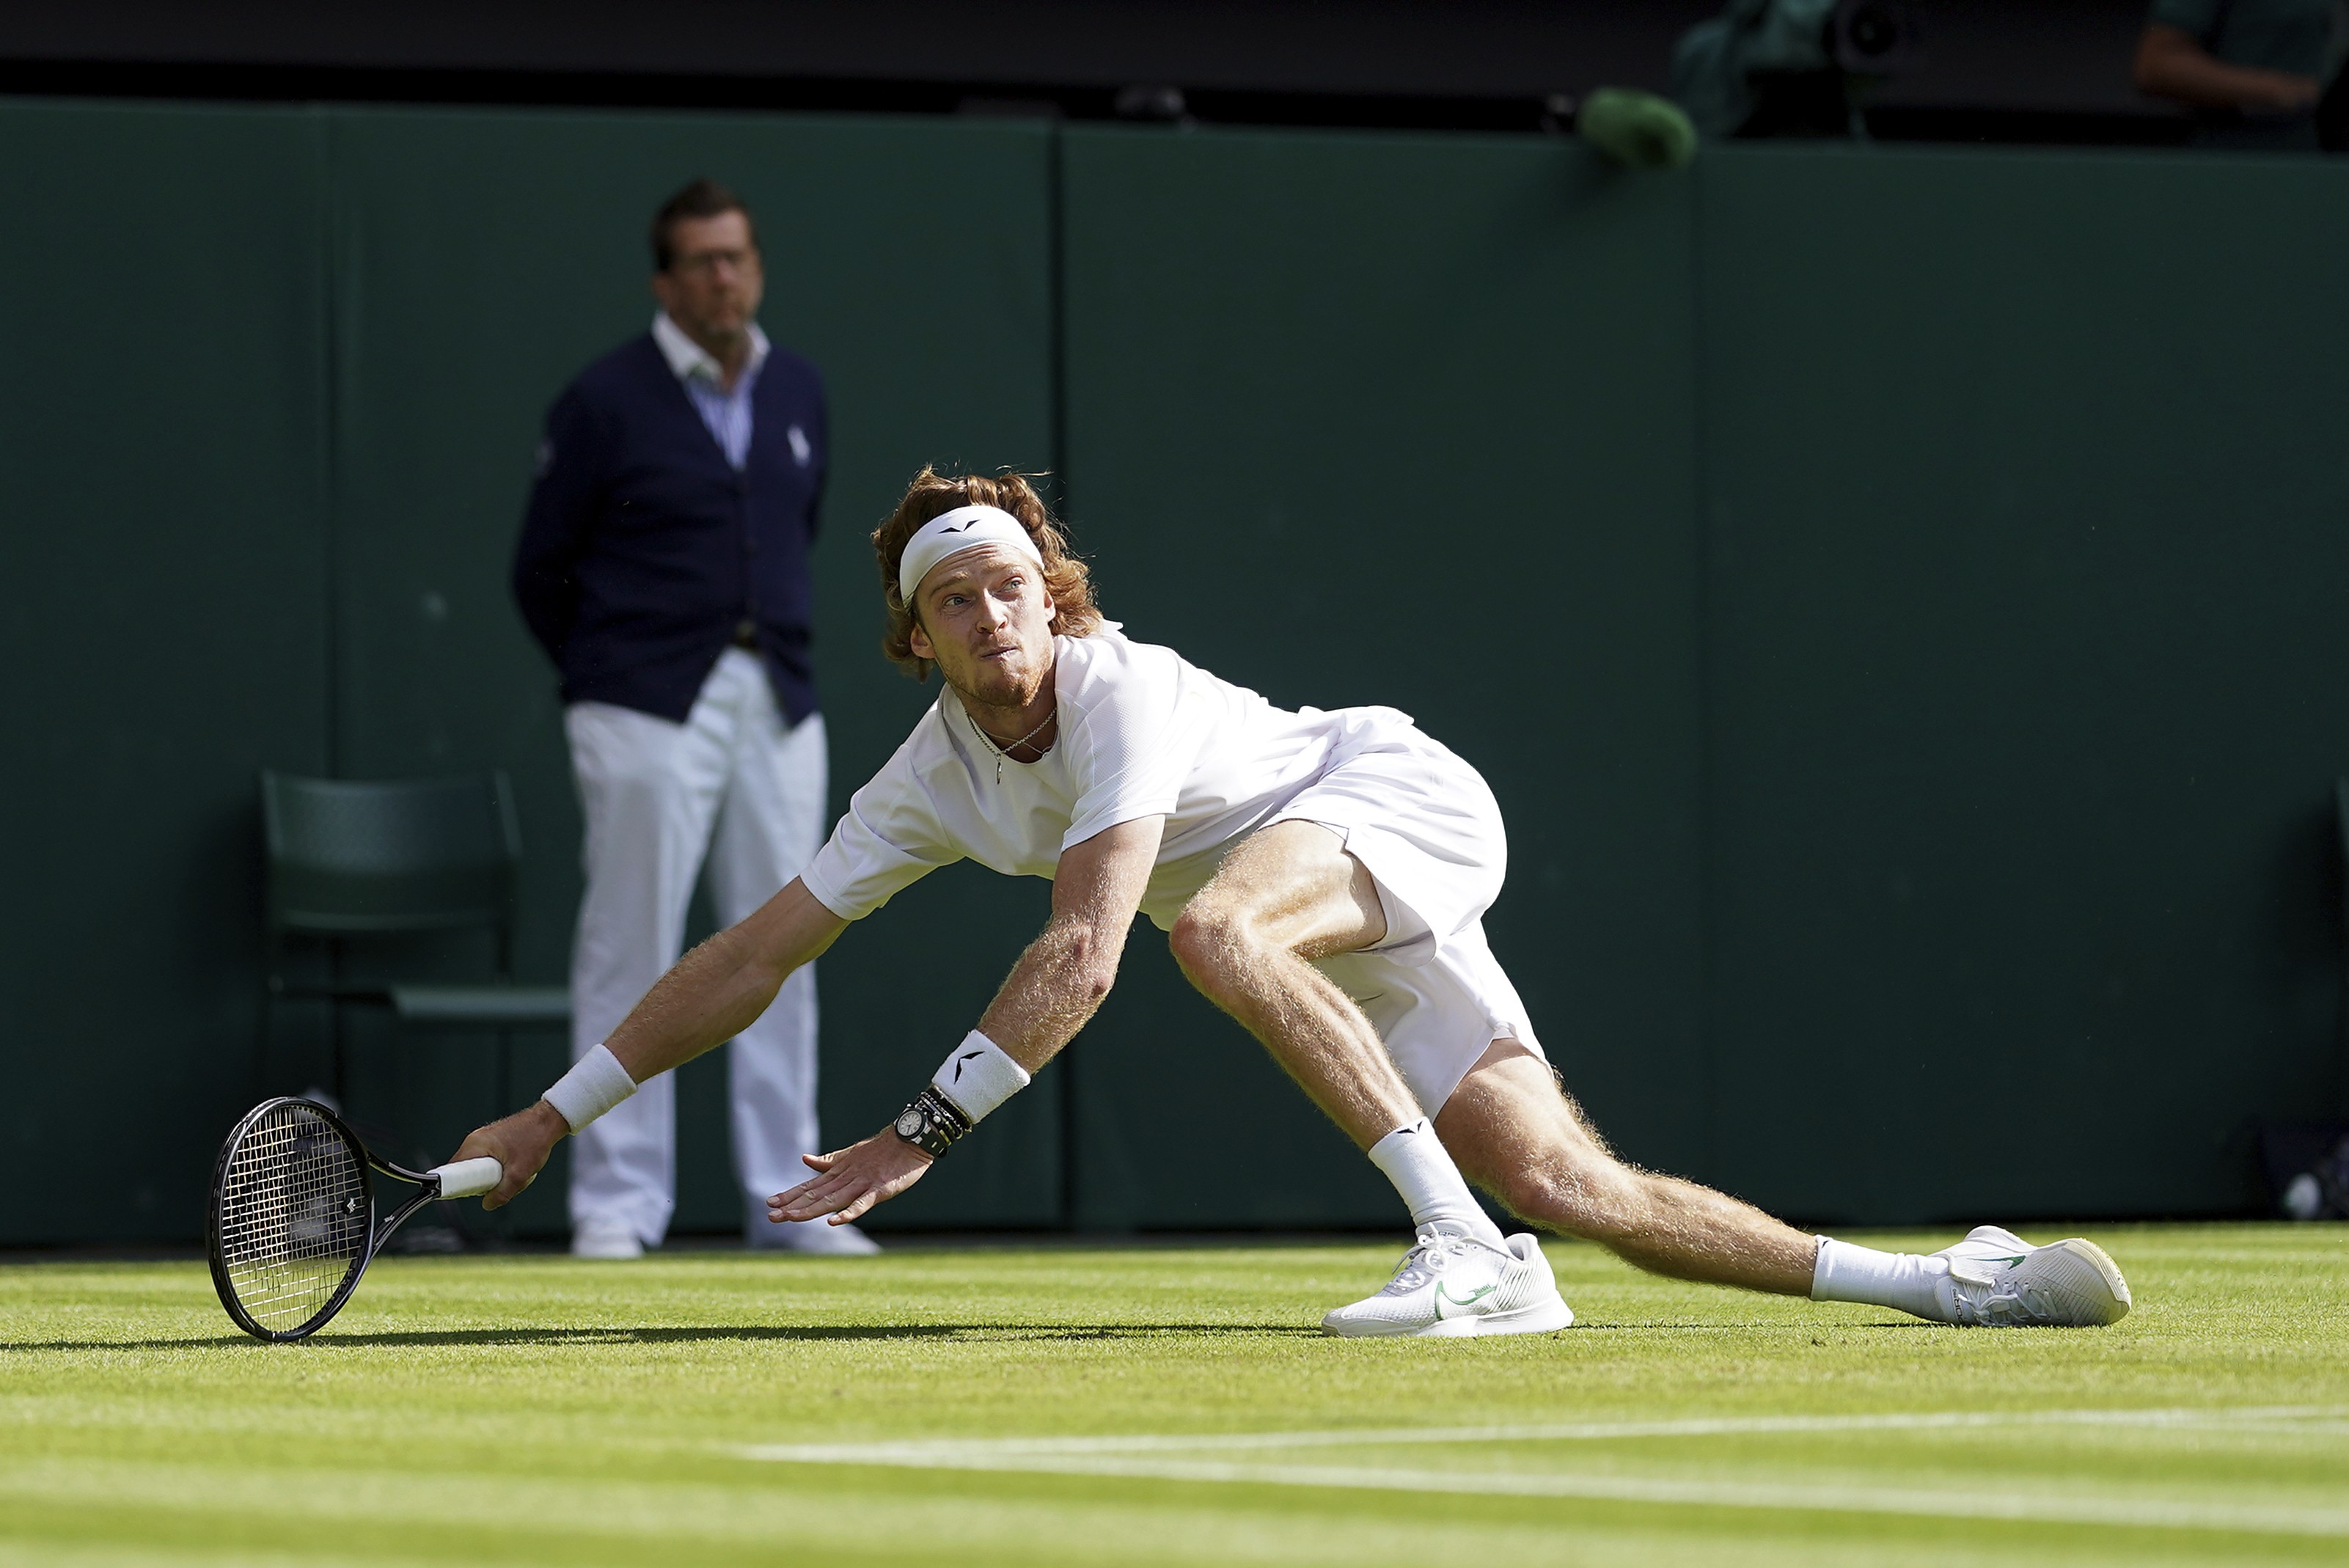 Andrey Rublev stayed calm, and out-showed a showman to escape Alexander Bublik at Wimbledon